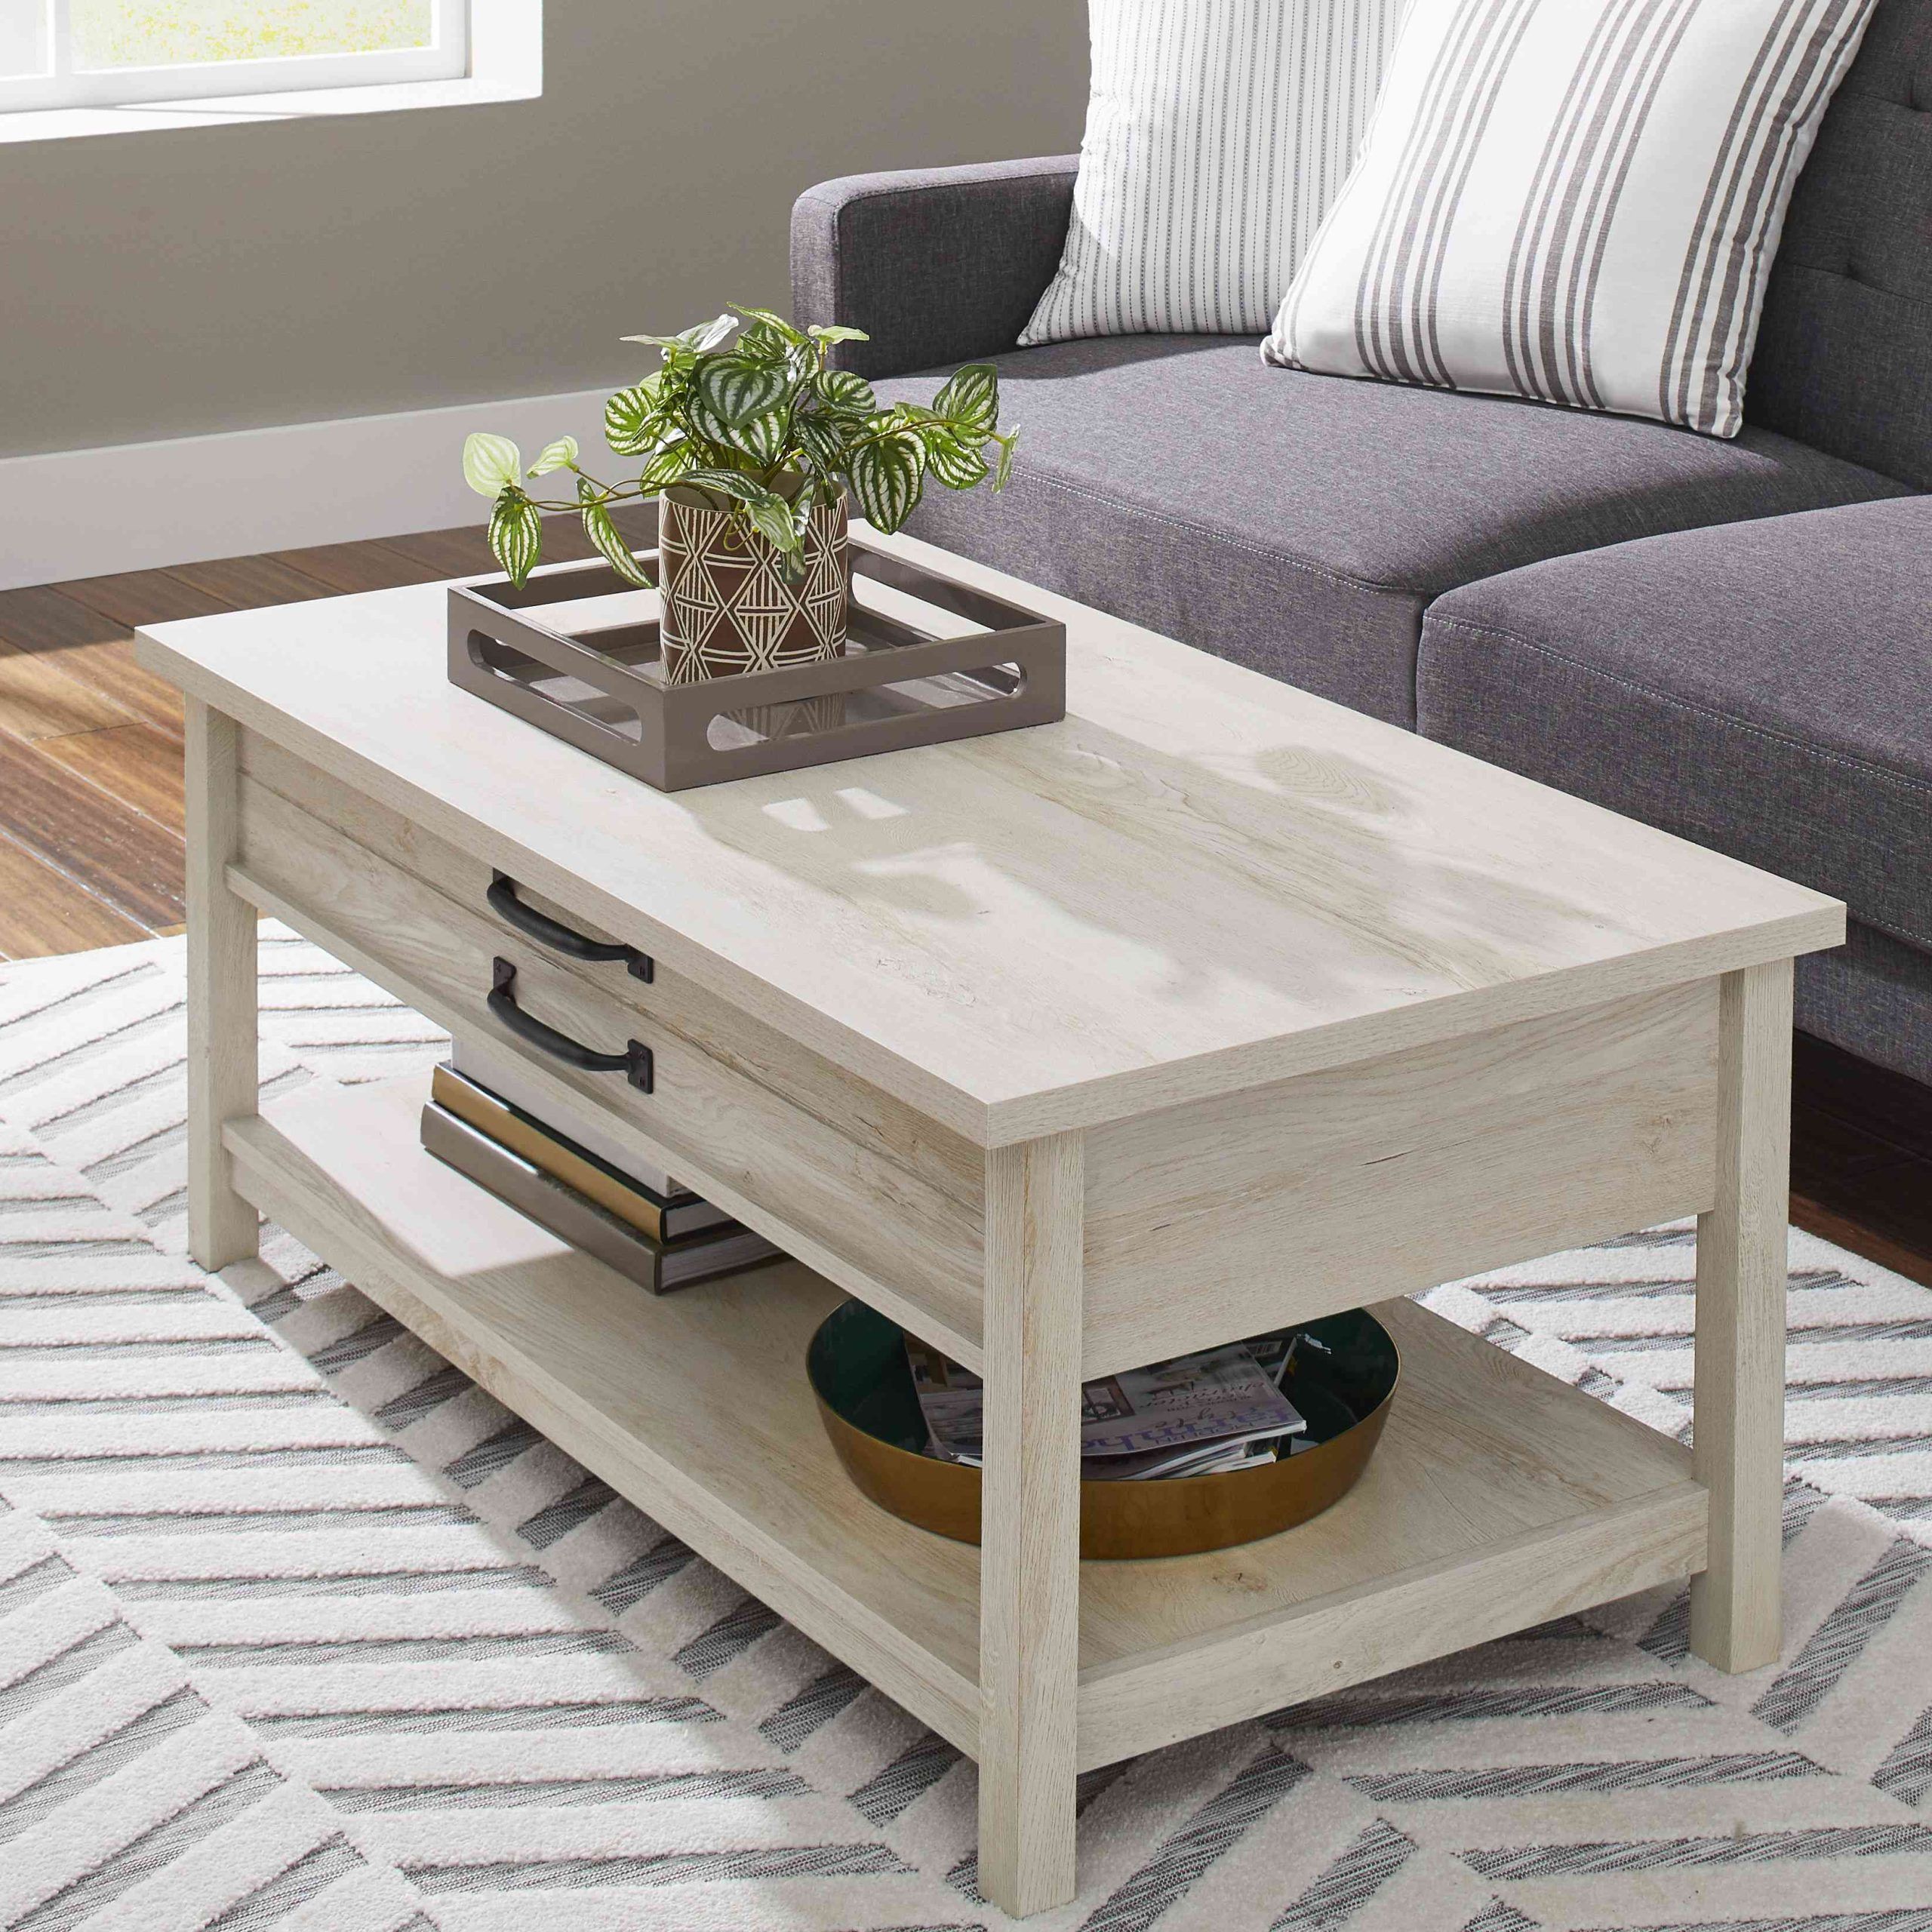 The 9 Best Lift Top Coffee Tables Of 2022 In Lift Top Coffee Tables With Shelves (View 10 of 15)